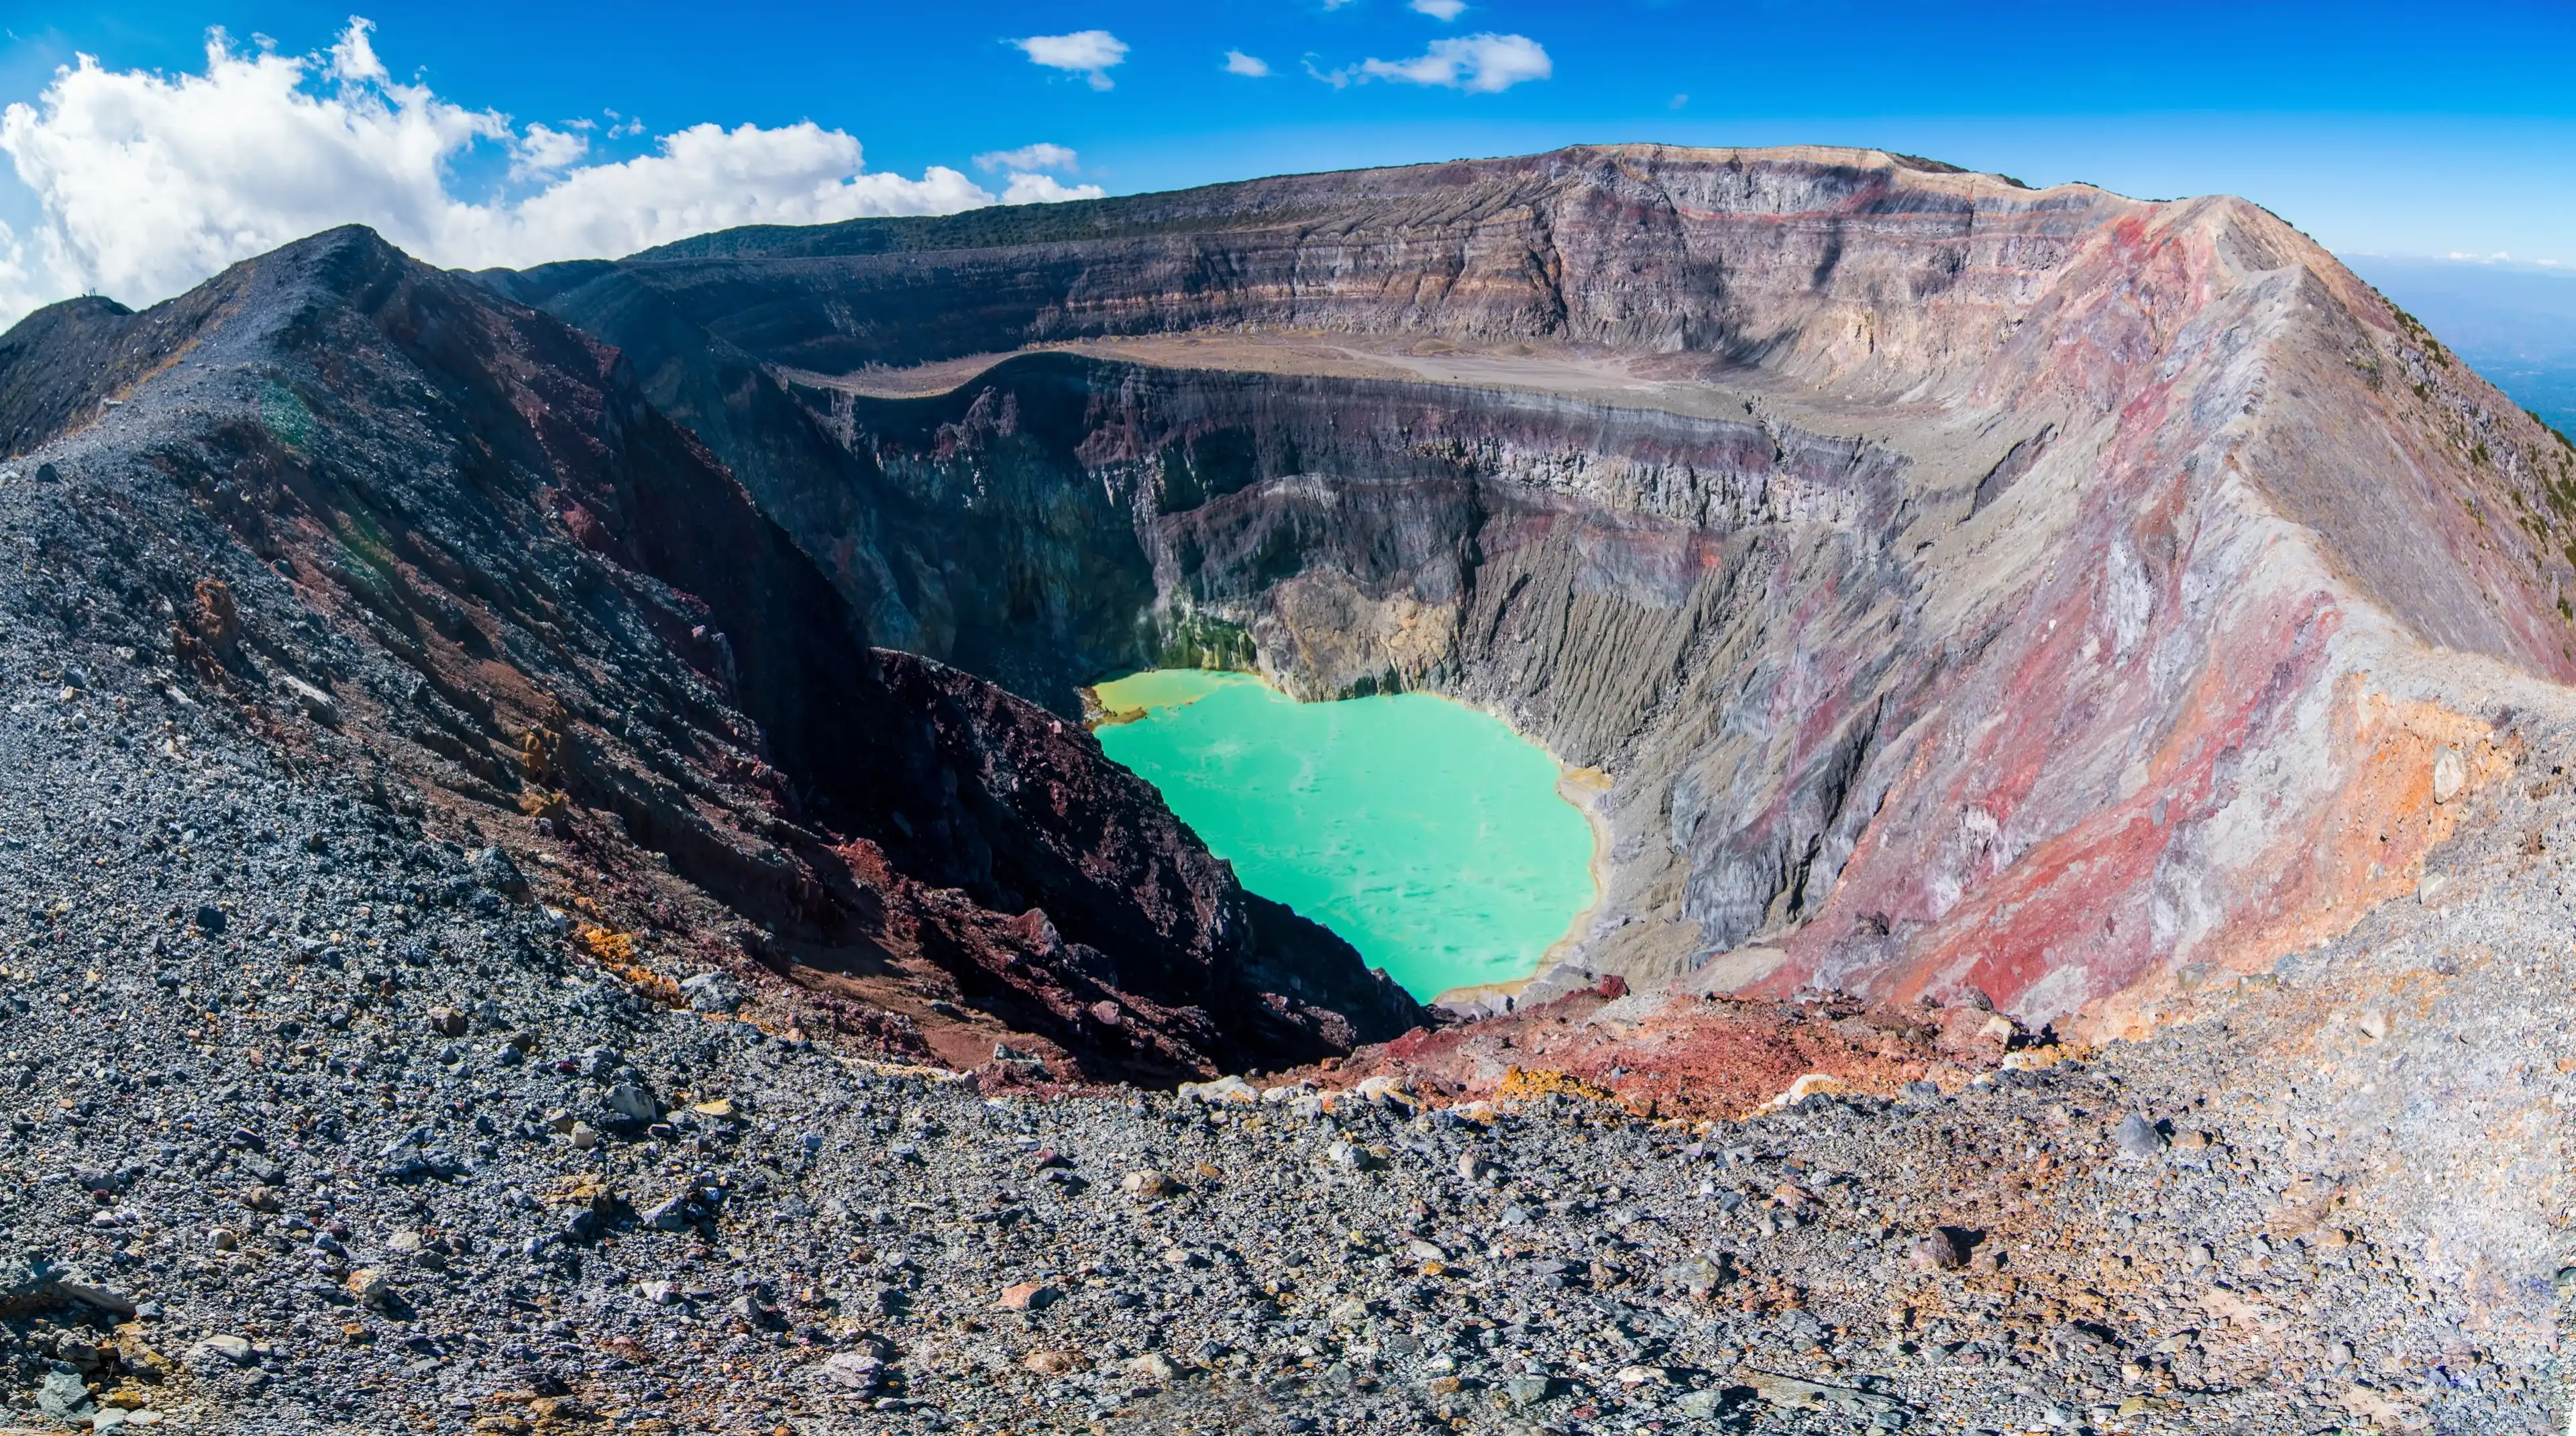 Panorama of Santa Ana volcano crater with turquoise volcanic lake.